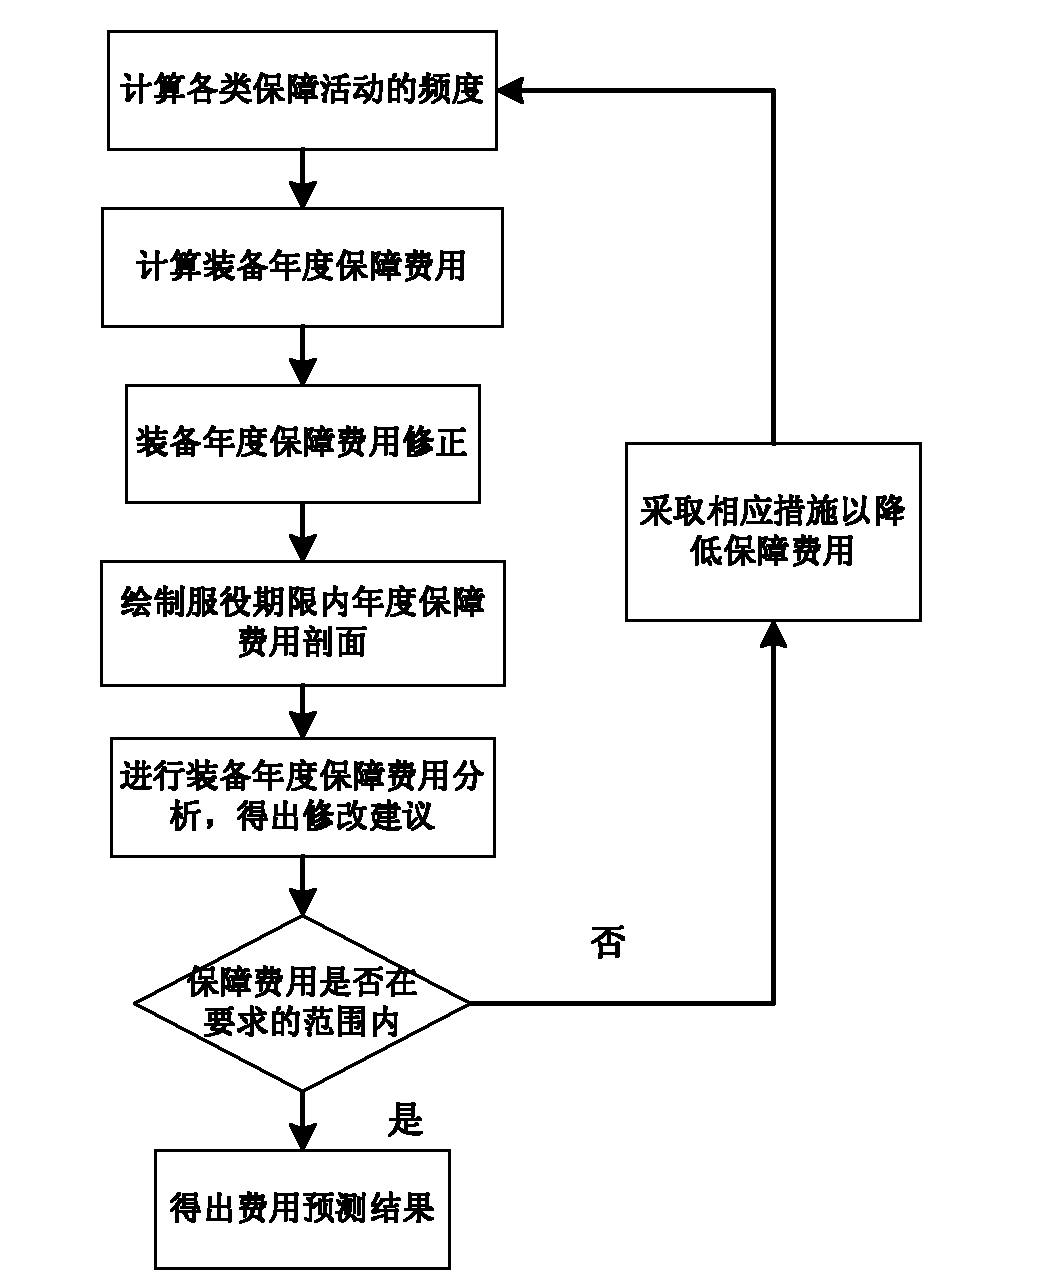 Method for forecasting equipment guarantee expense in development stage